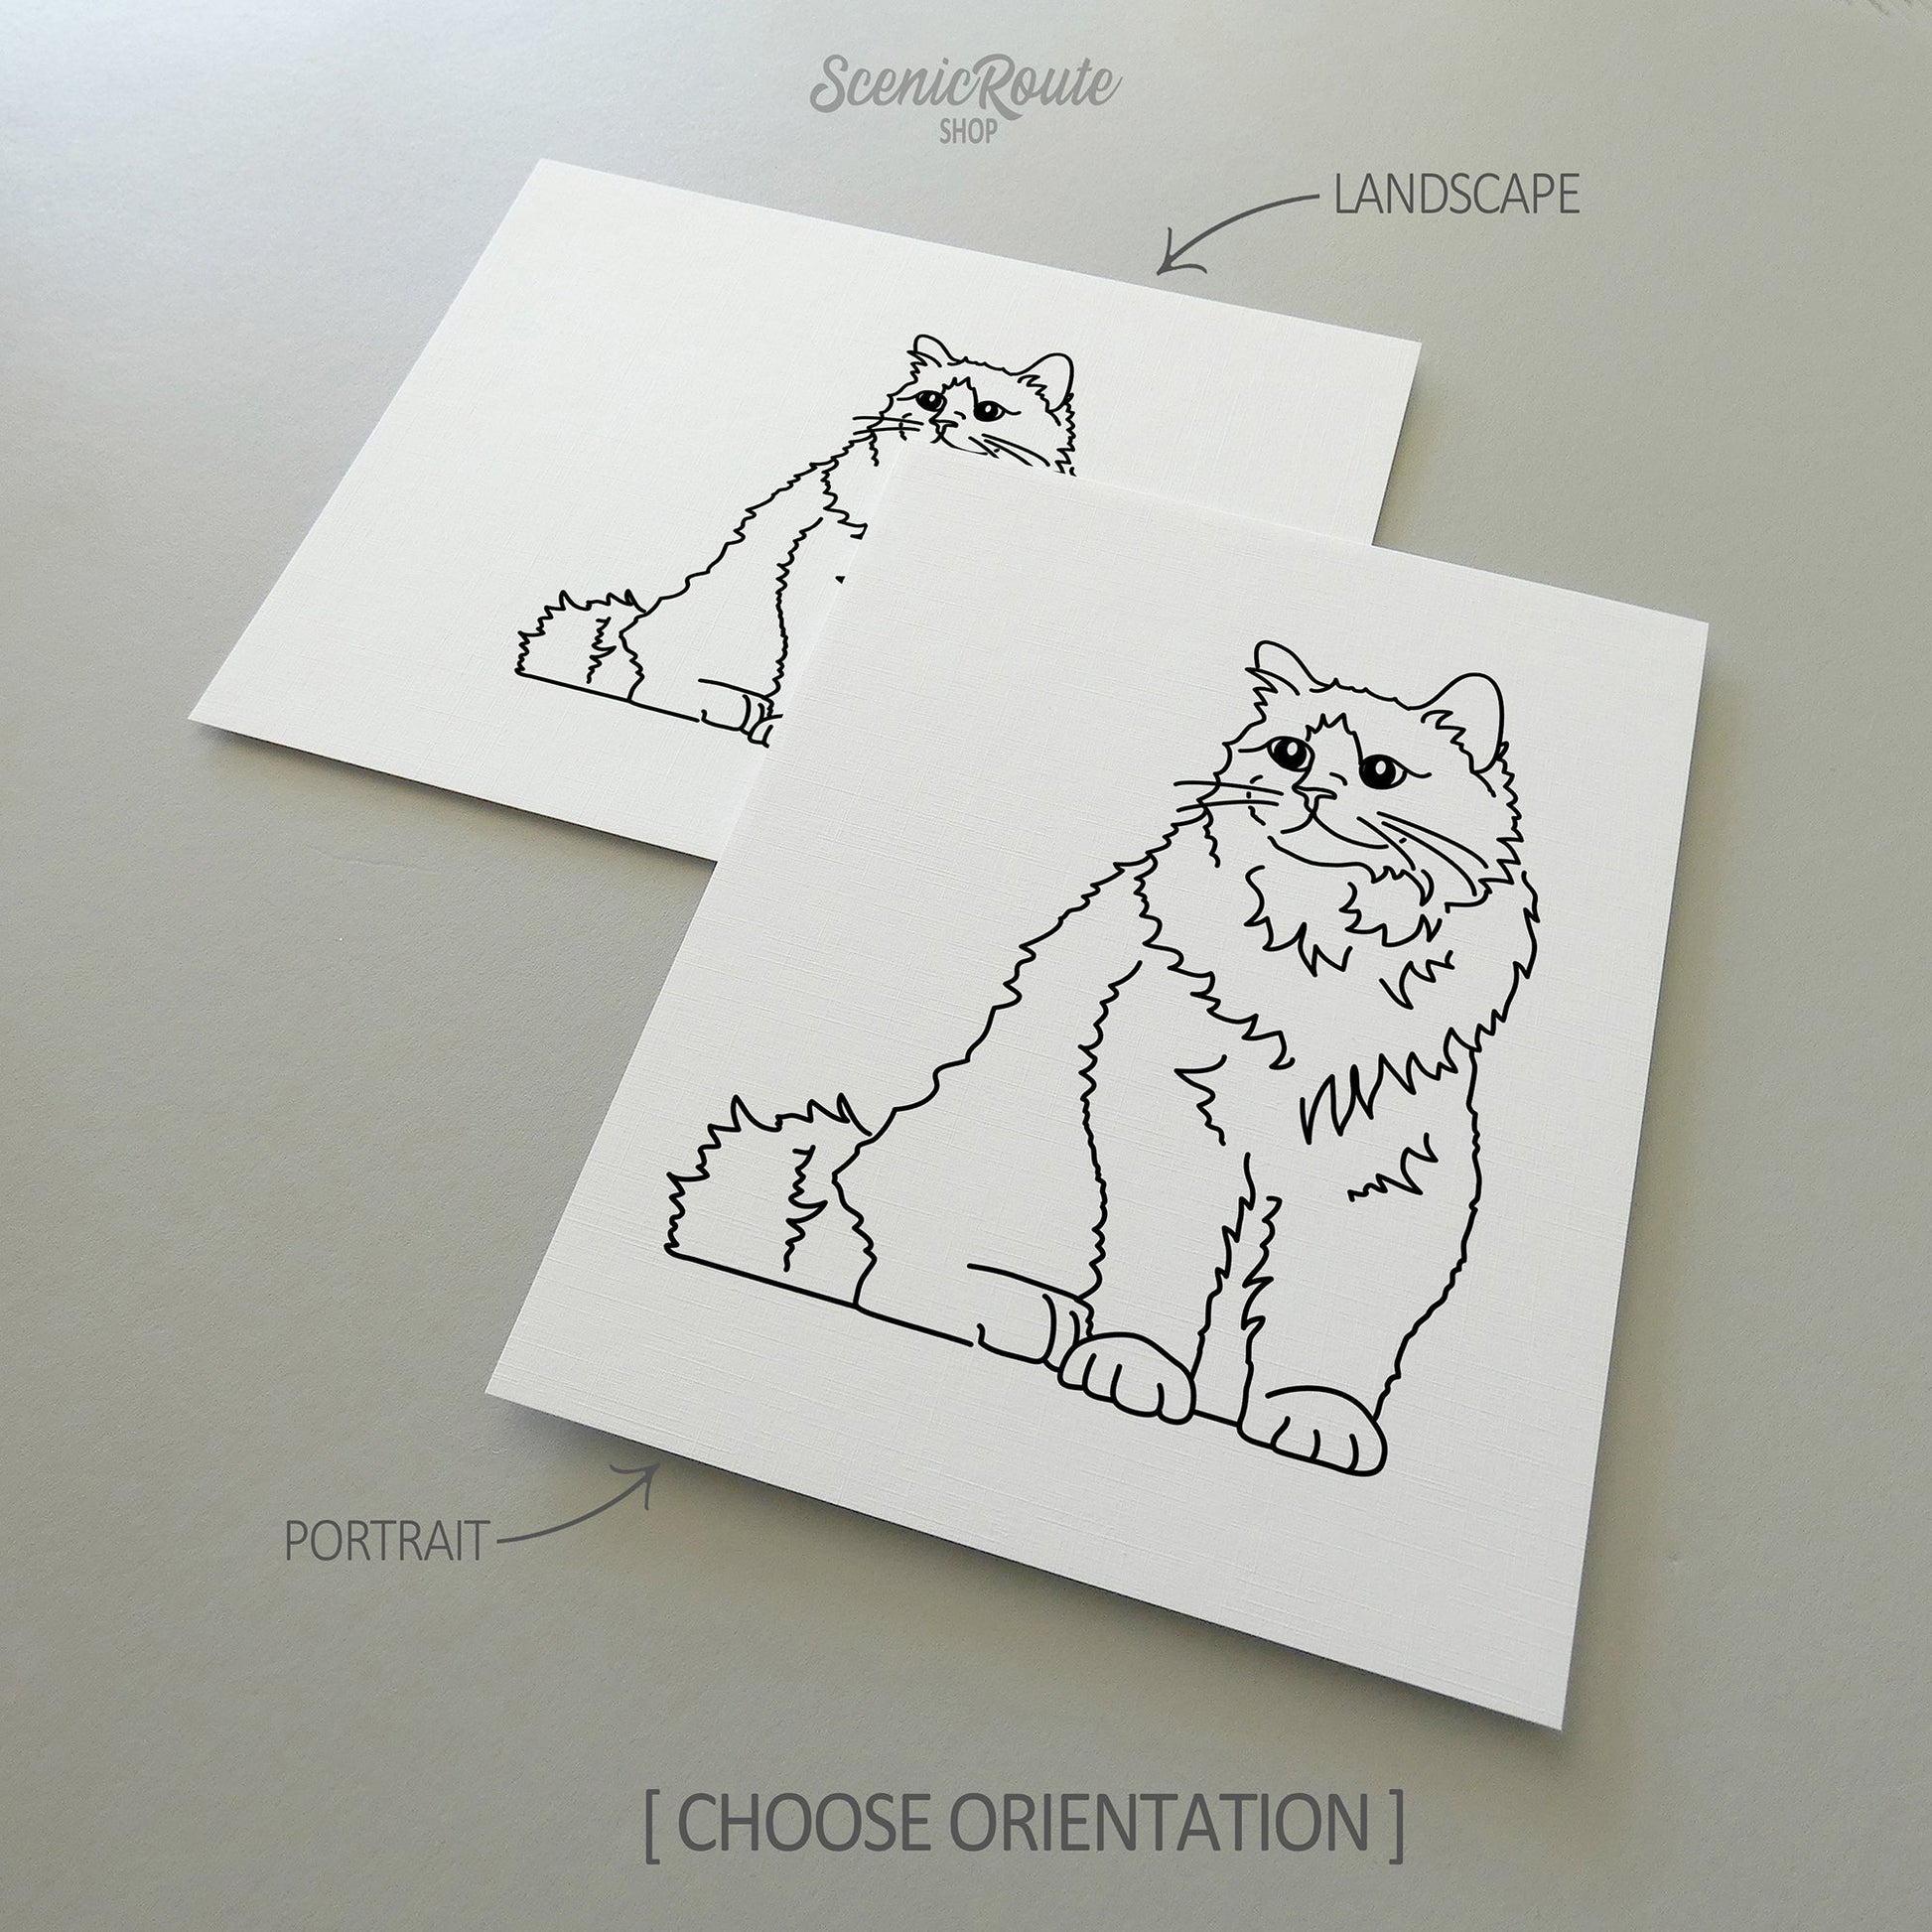 Two line art drawings of a Birman cat on white linen paper with a gray background.  The pieces are shown in portrait and landscape orientation for the available art print options.